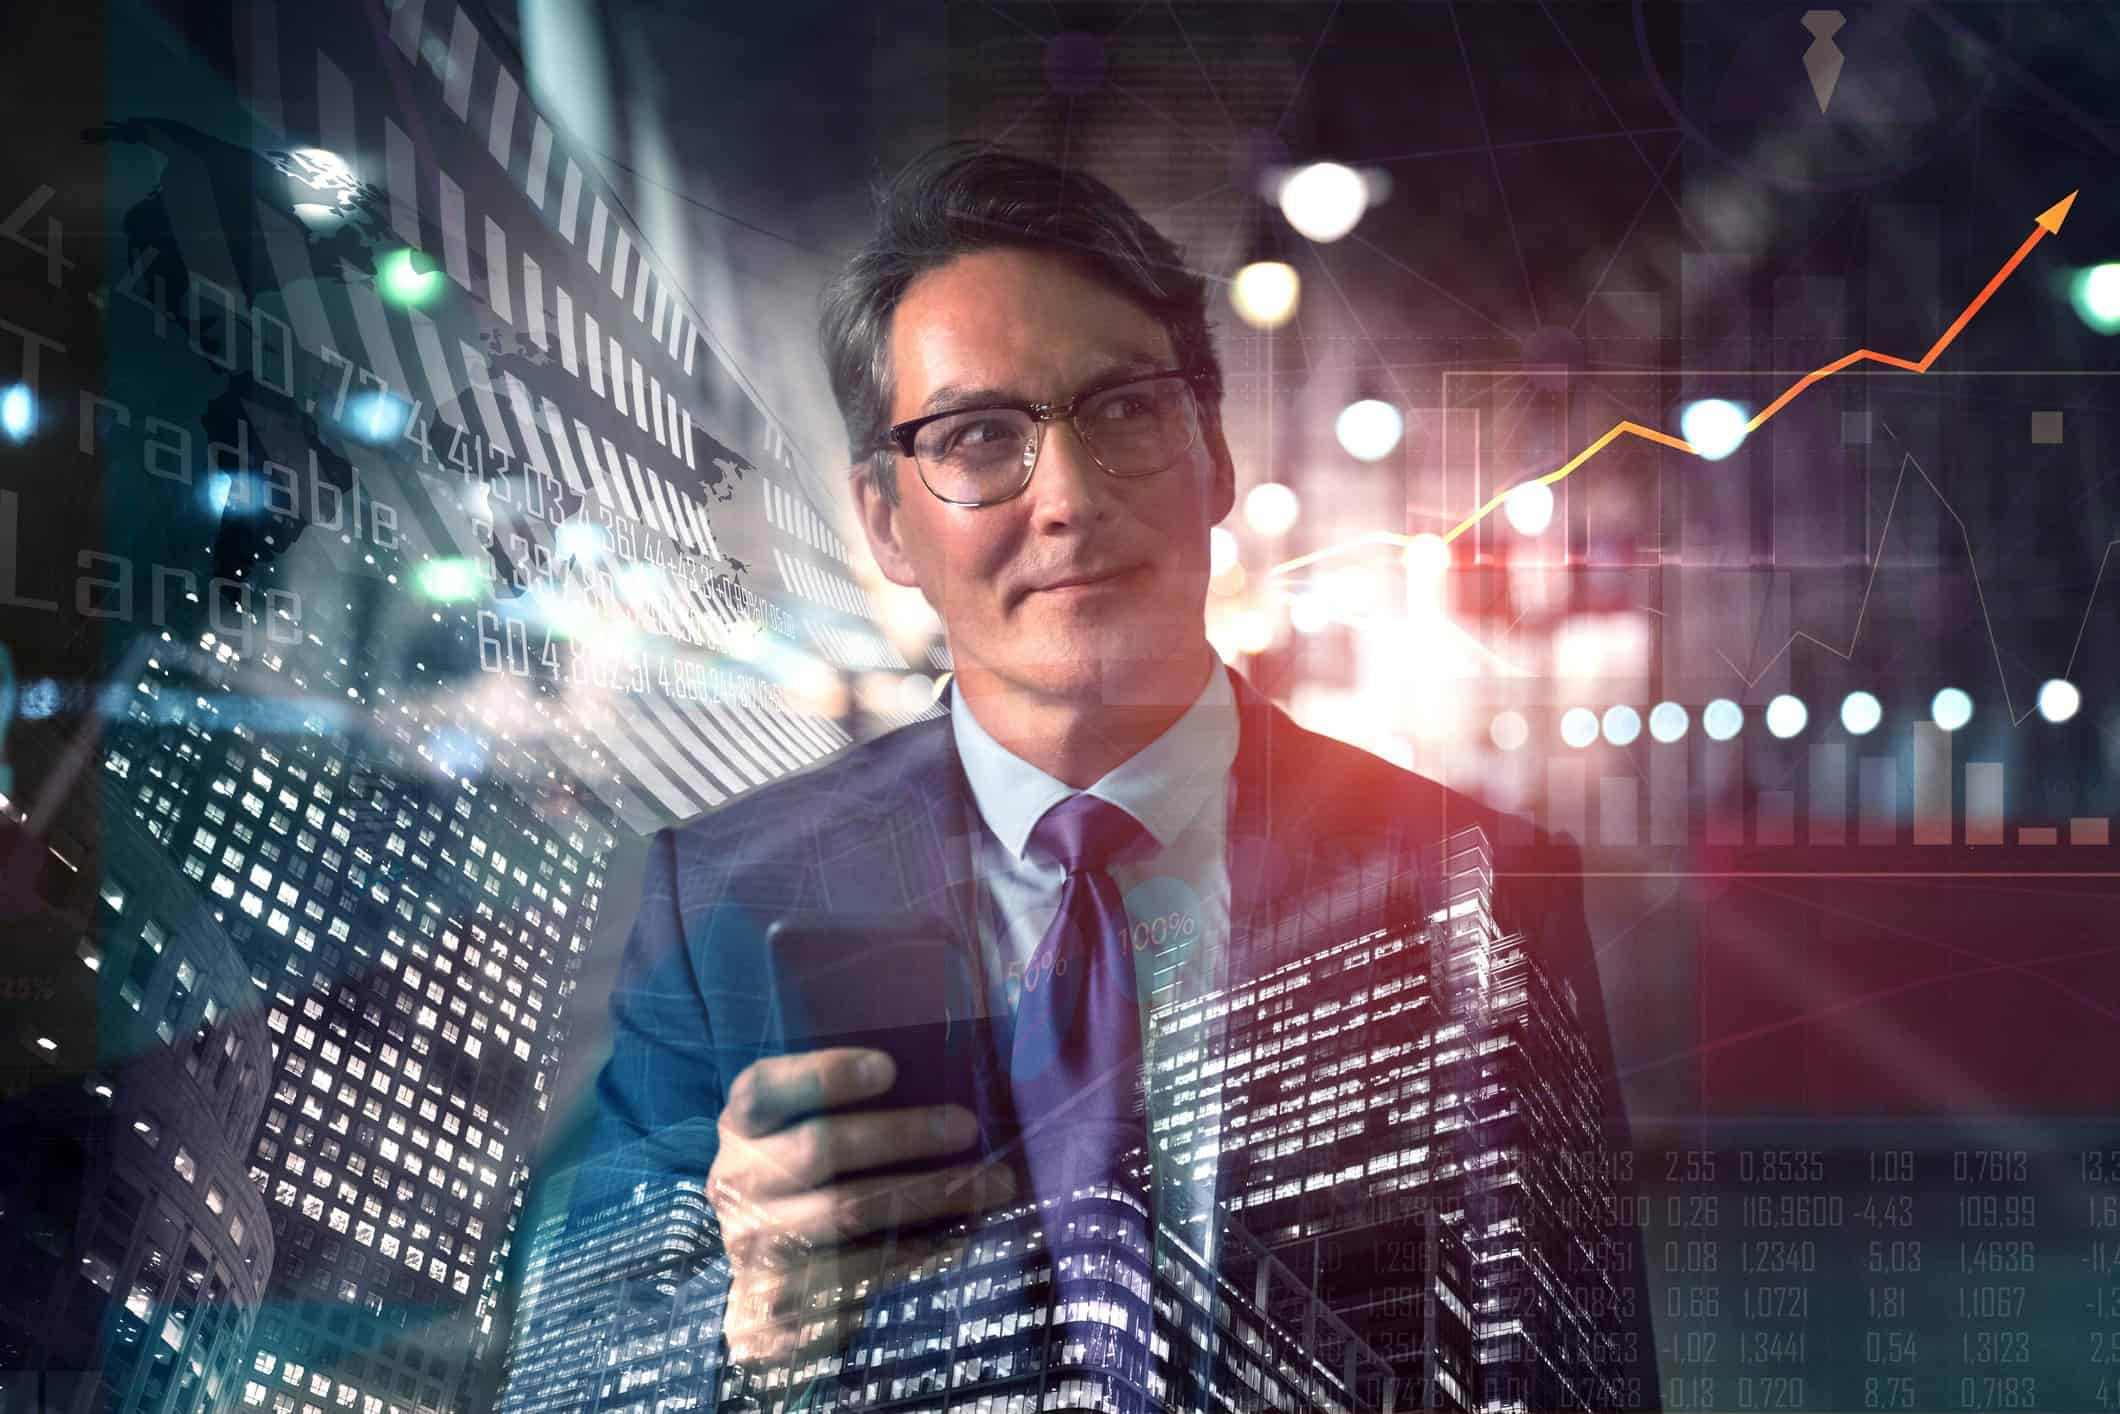 Man holding phone in front of stocks graphic